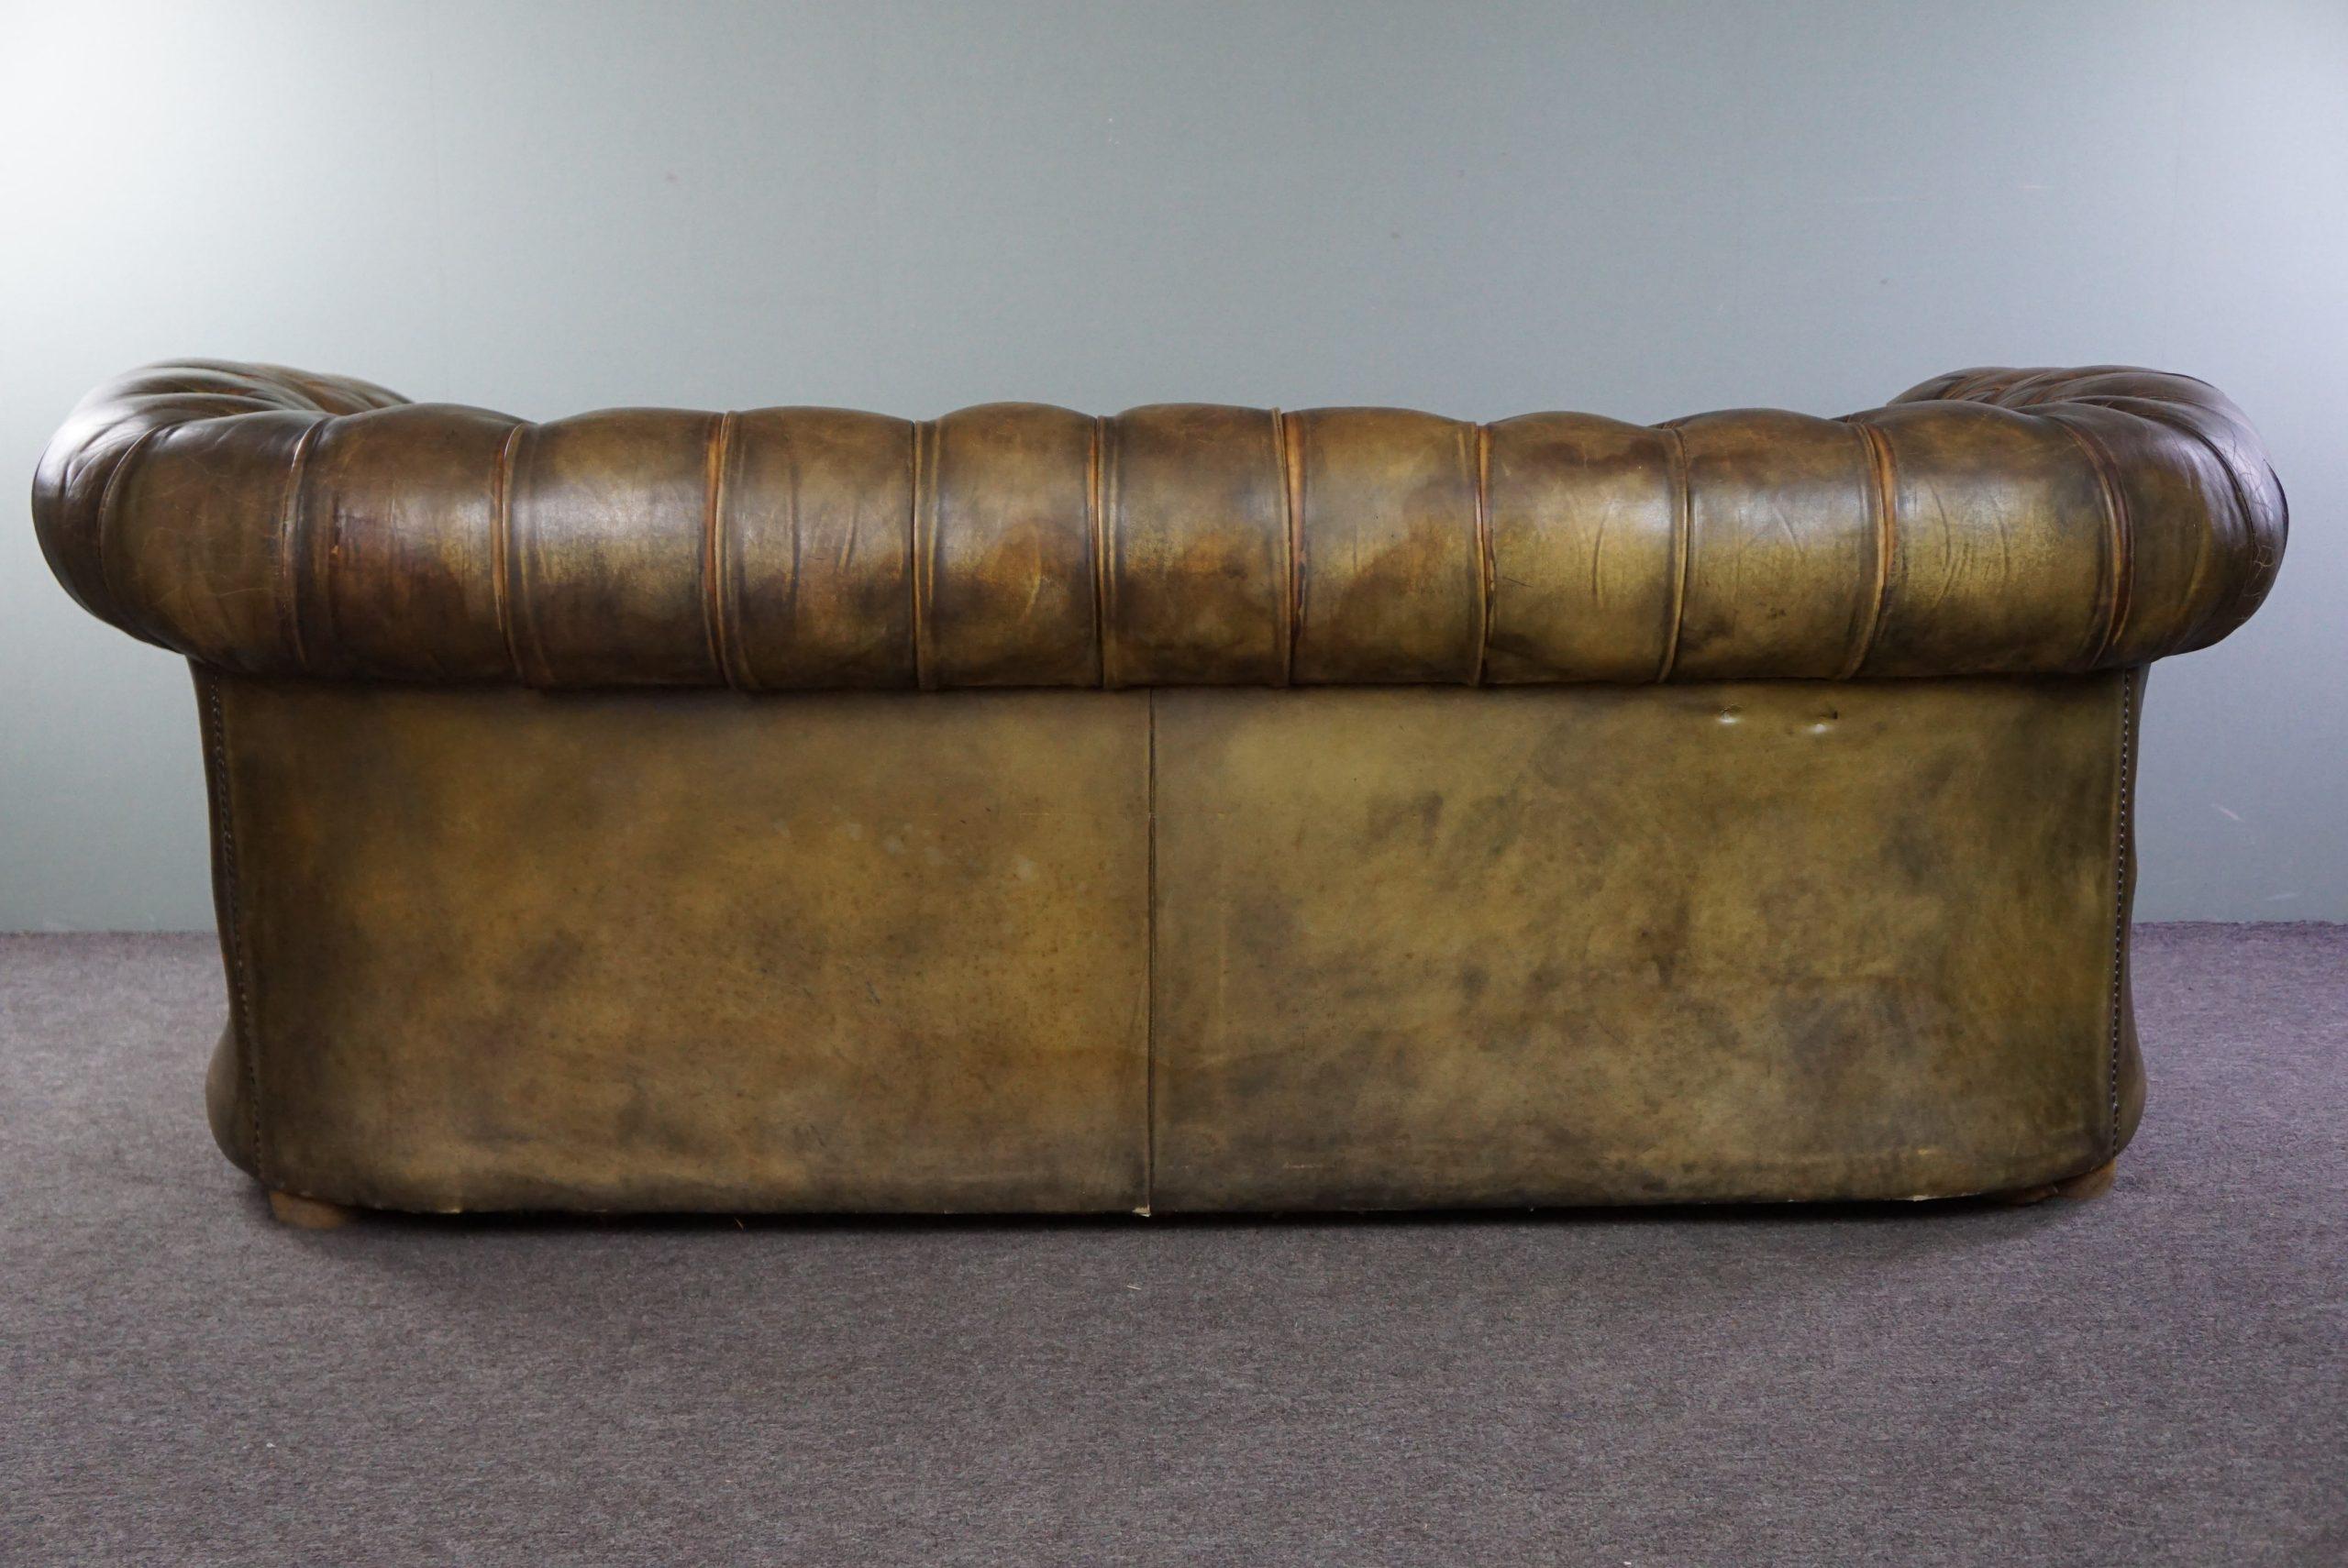 Offered is this super sturdy 2.5-seater chesterfield sofa in a beautiful moss green color. This gorgeous sofa in its beautiful green color is a feast for the eyes. It has acquired some scars over its already quite long life, but in our opinion, that